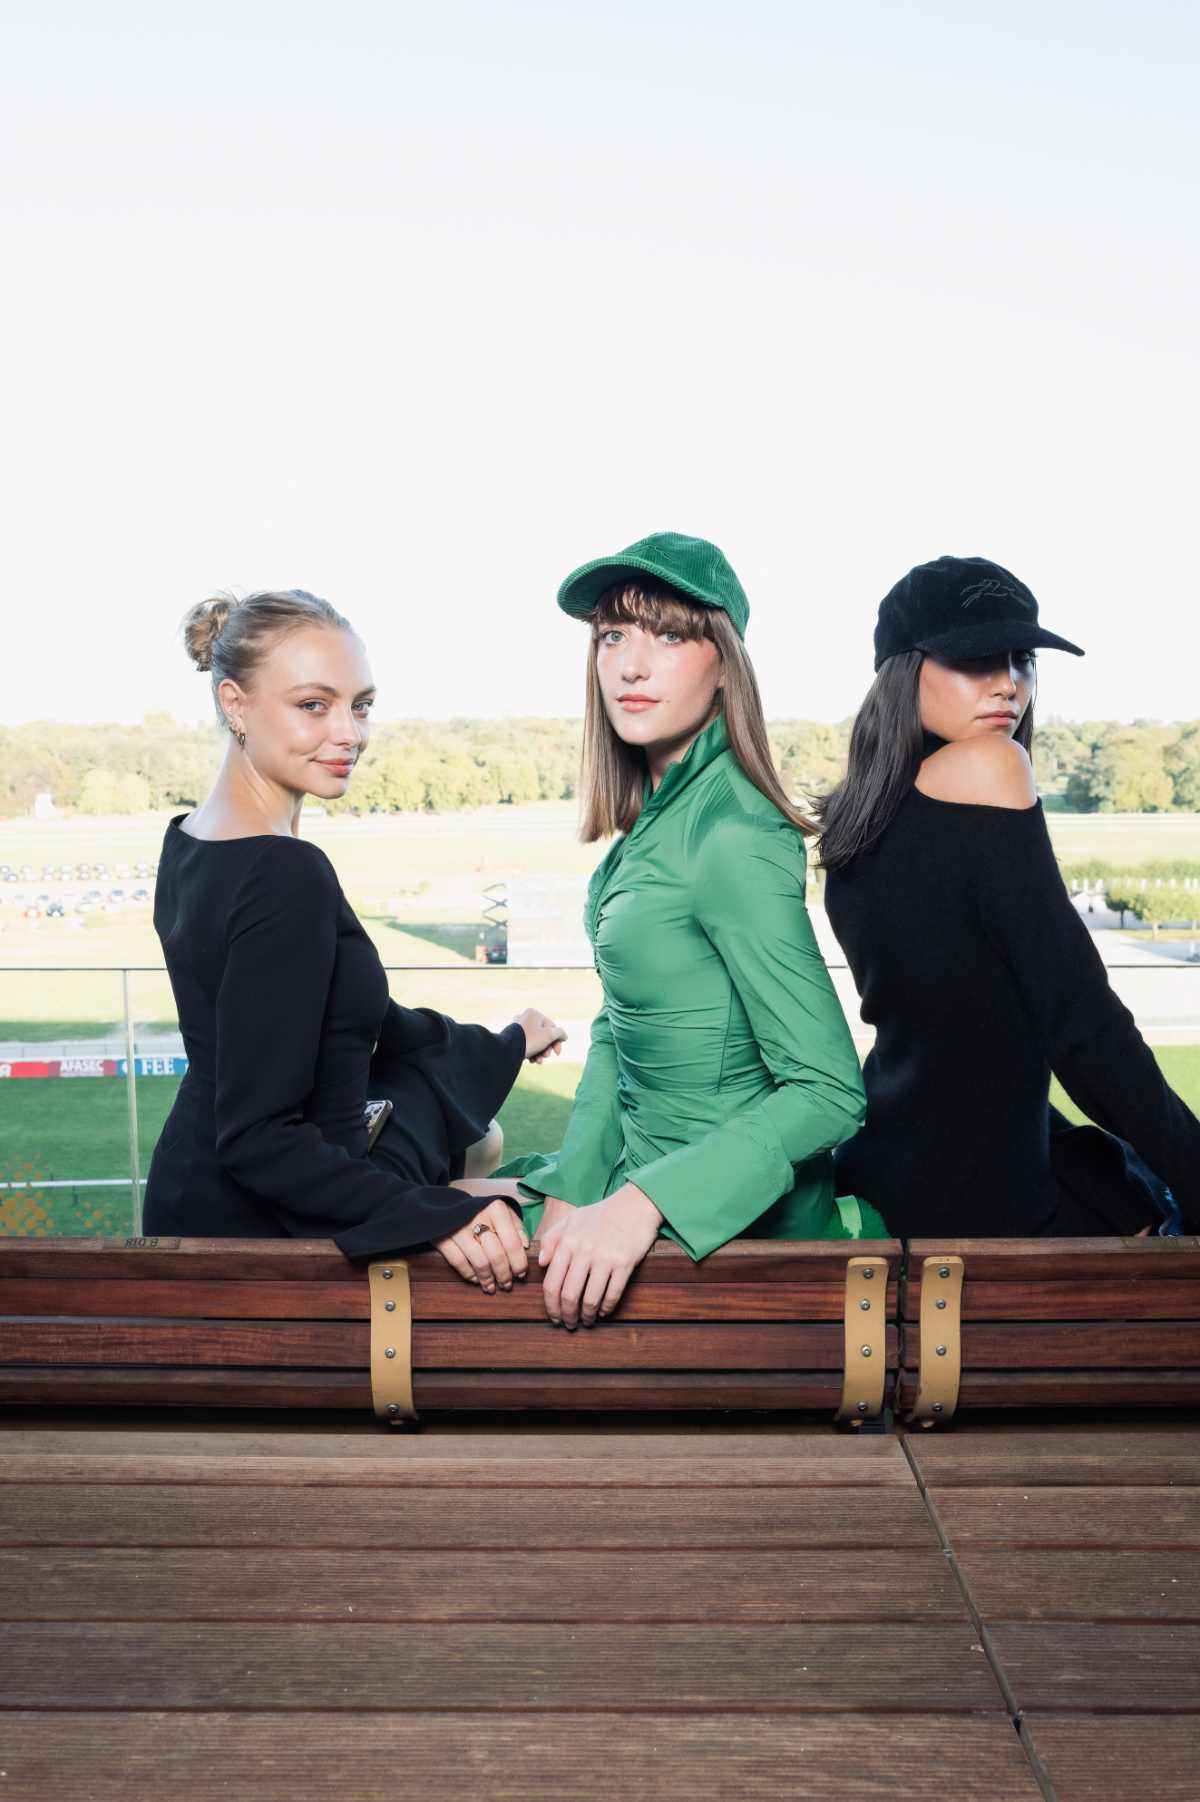 An Outstanding Longchamp Party At The Races